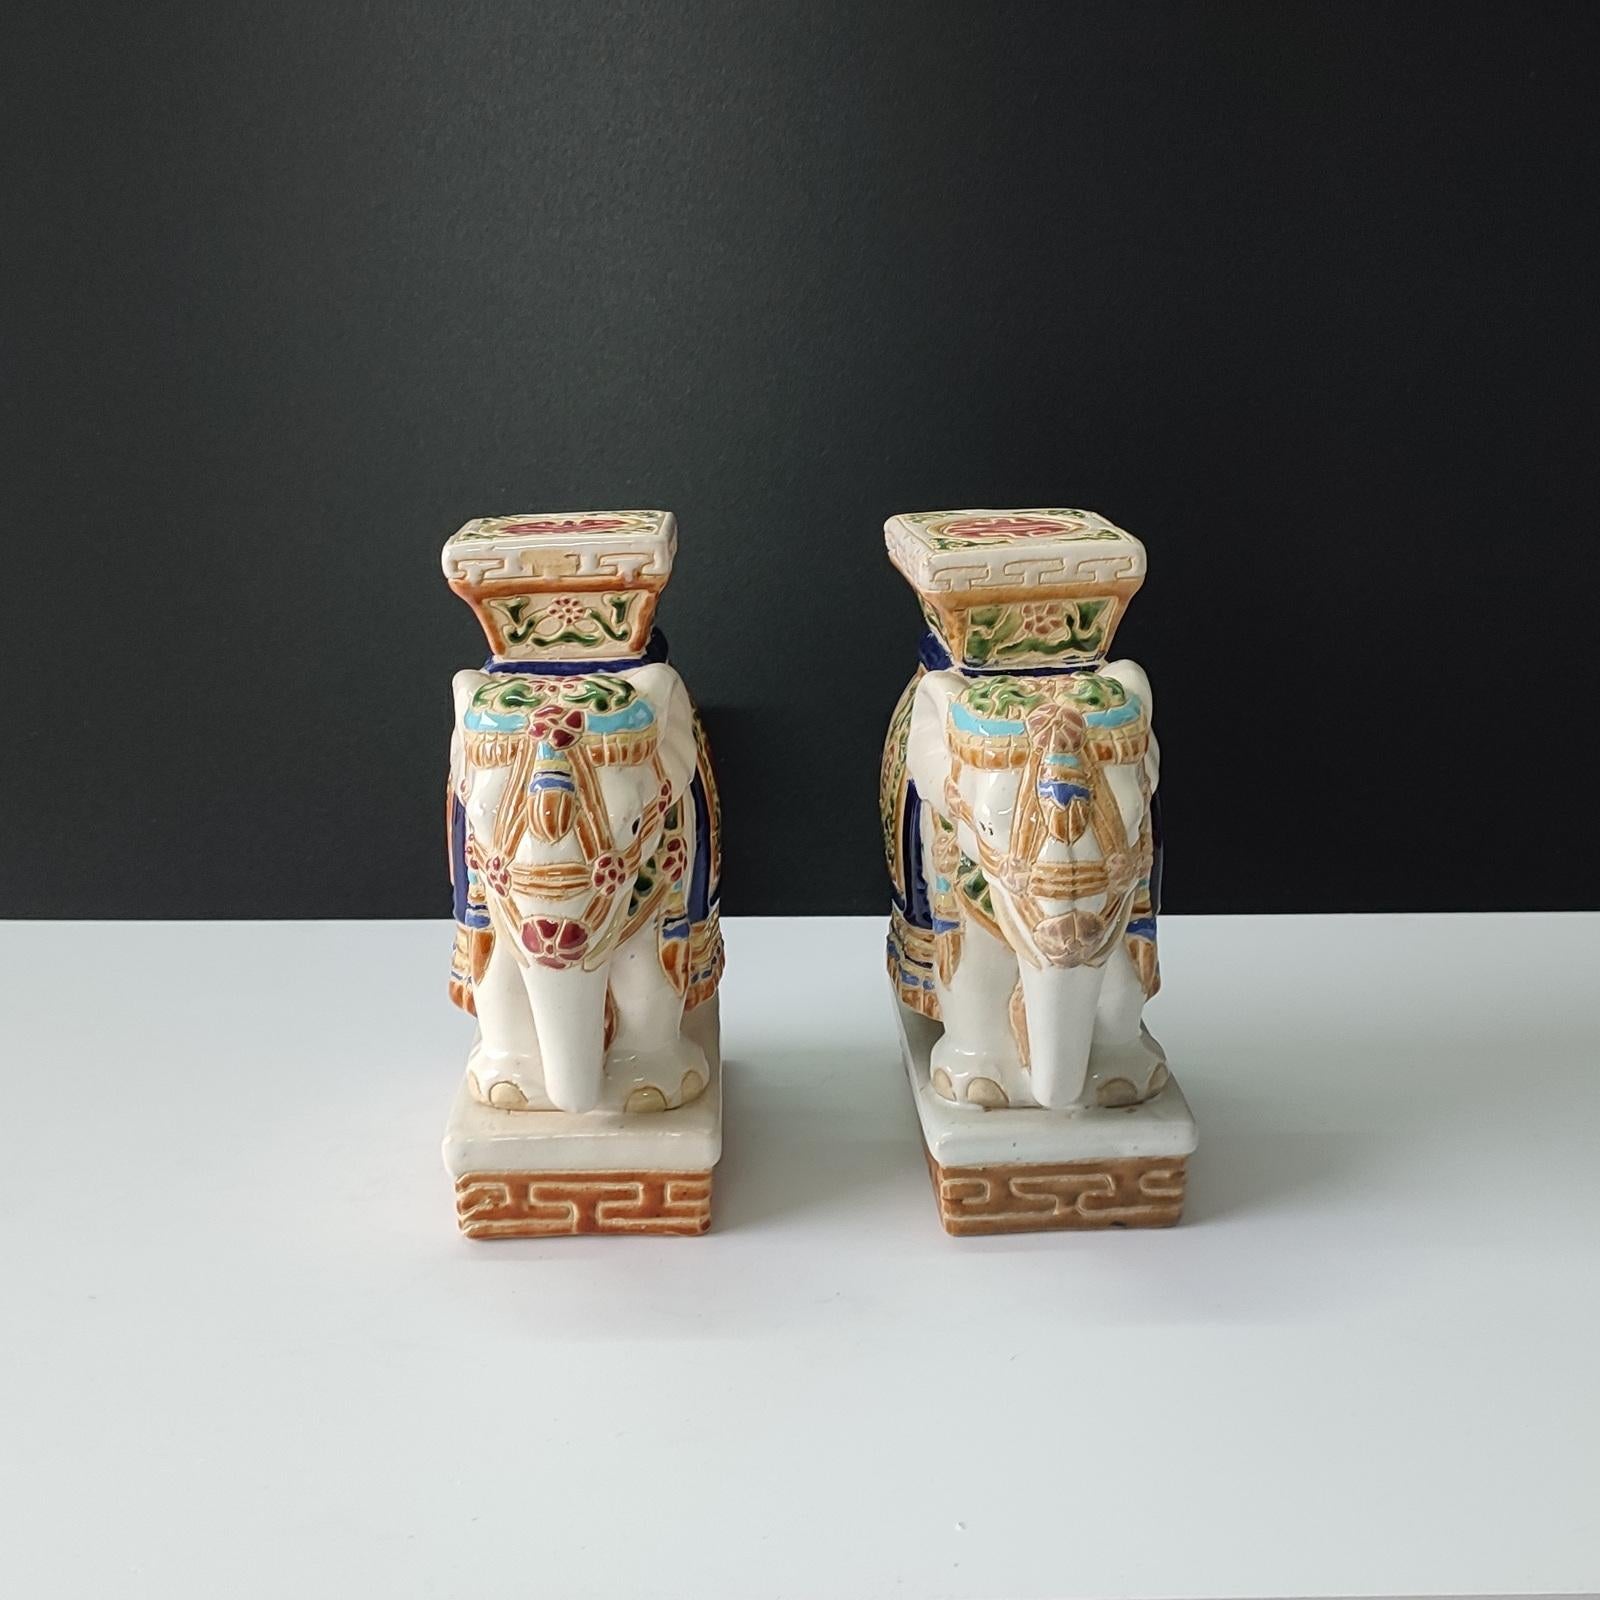 Glazed Pair of Polychrome Ceramic Elephant Plant Holder, Bookends, Mid 20th Century For Sale